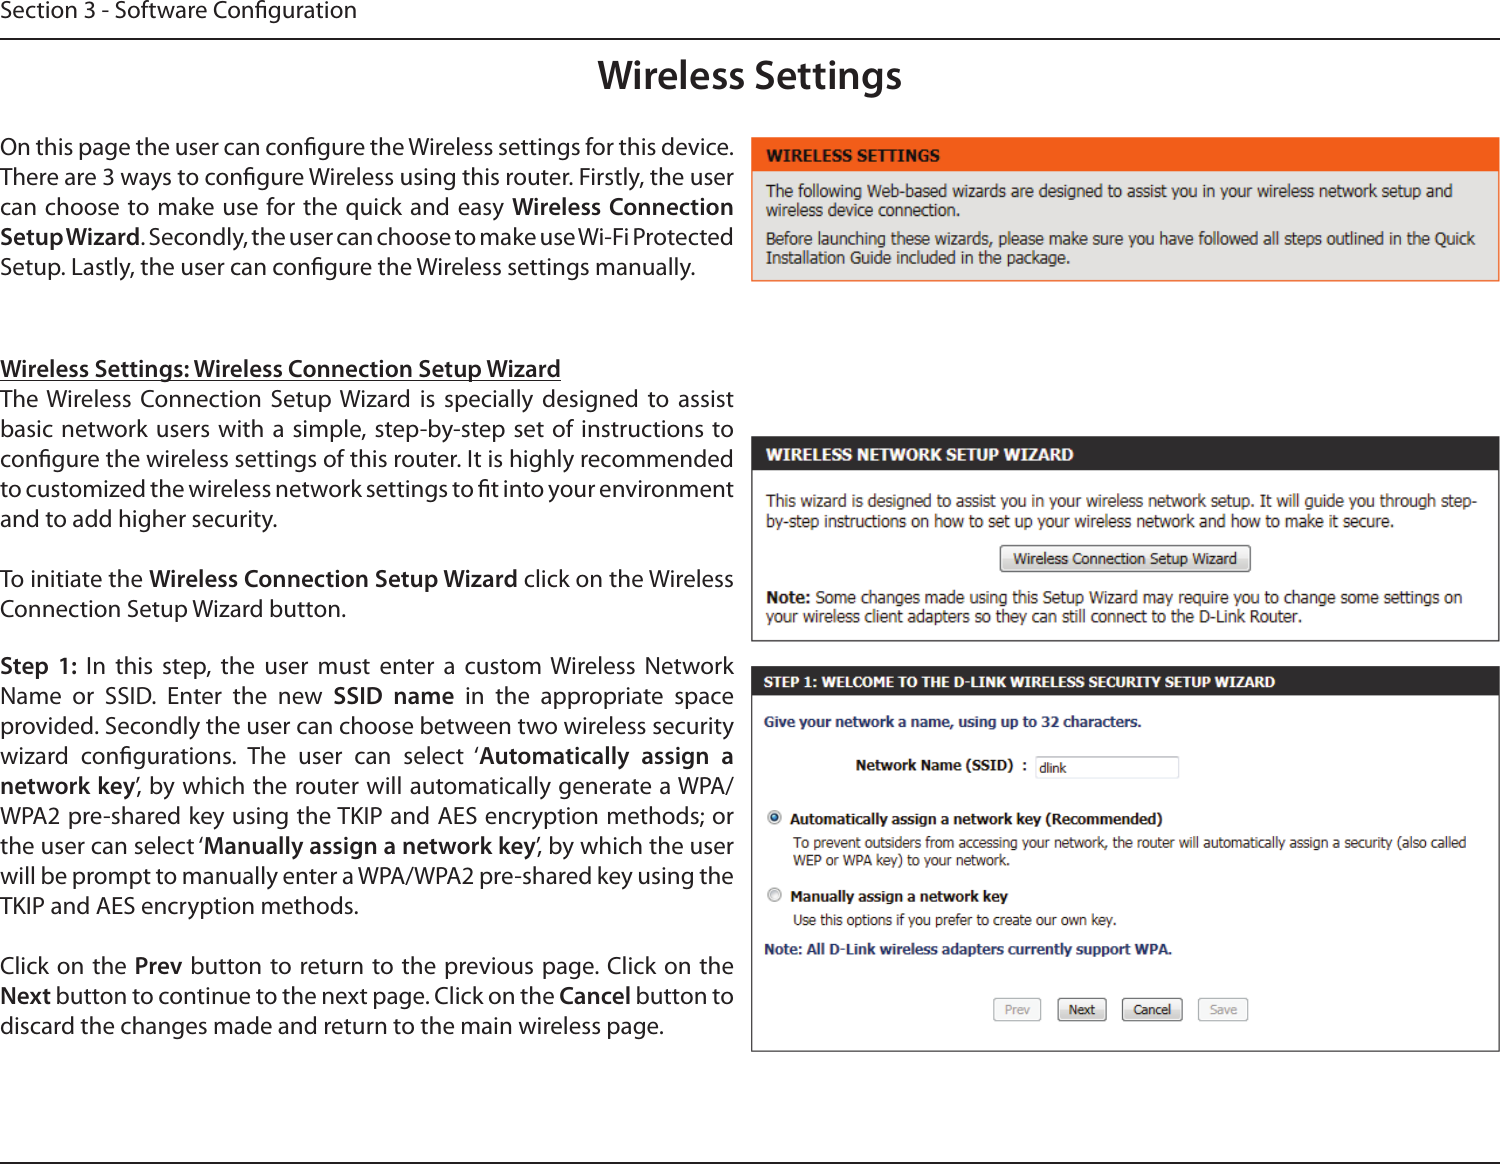 Section 3 - Software CongurationWireless SettingsOn this page the user can congure the Wireless settings for this device. There are 3 ways to congure Wireless using this router. Firstly, the user can choose to make use for the quick and  easy Wireless Connection Setup Wizard. Secondly, the user can choose to make use Wi-Fi Protected Setup. Lastly, the user can congure the Wireless settings manually.Wireless Settings: Wireless Connection Setup WizardThe Wireless  Connection  Setup Wizard  is  specially  designed  to  assist basic network users with a  simple, step-by-step set of  instructions to congure the wireless settings of this router. It is highly recommended to customized the wireless network settings to t into your environment and to add higher security.To initiate the Wireless Connection Setup Wizard click on the Wireless Connection Setup Wizard button.Step  1:  In  this  step,  the  user  must  enter  a  custom  Wireless  Network Name  or  SSID.  Enter  the  new  SSID  name  in  the  appropriate  space provided. Secondly the user can choose between two wireless security wizard  congurations.  The  user  can  select  ‘Automatically  assign  a network key’, by which the router will automatically generate a WPA/WPA2 pre-shared key using the TKIP and AES encryption methods; or the user can select ‘Manually assign a network key’, by which the user will be prompt to manually enter a WPA/WPA2 pre-shared key using the TKIP and AES encryption methods.Click on the Prev button to return to the previous page. Click on the Next button to continue to the next page. Click on the Cancel button to discard the changes made and return to the main wireless page.